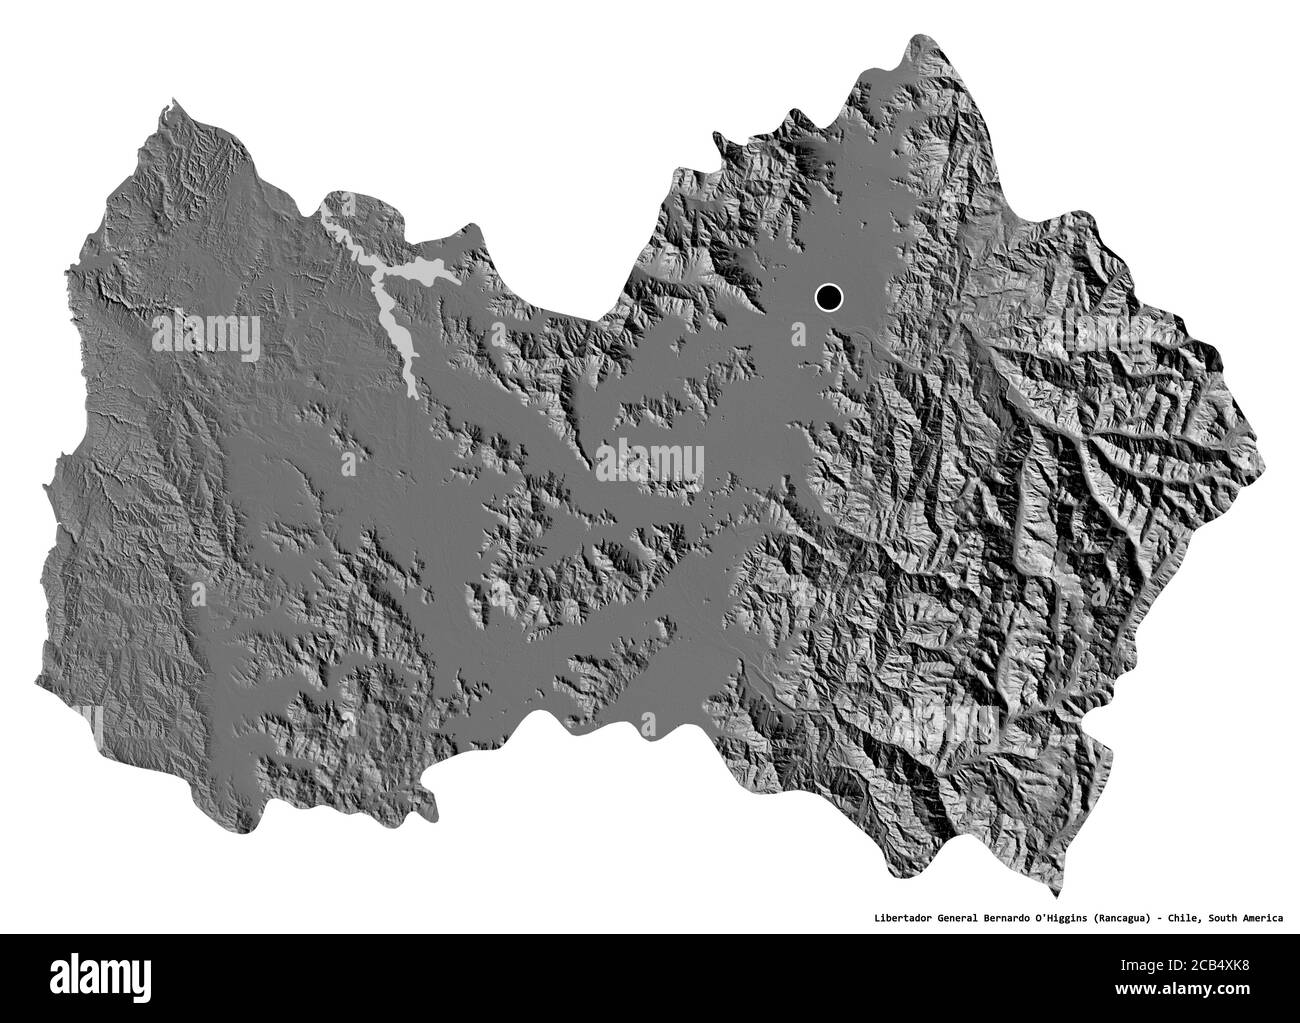 Shape of Libertador General Bernardo O'Higgins, region of Chile, with its capital isolated on white background. Bilevel elevation map. 3D rendering Stock Photo